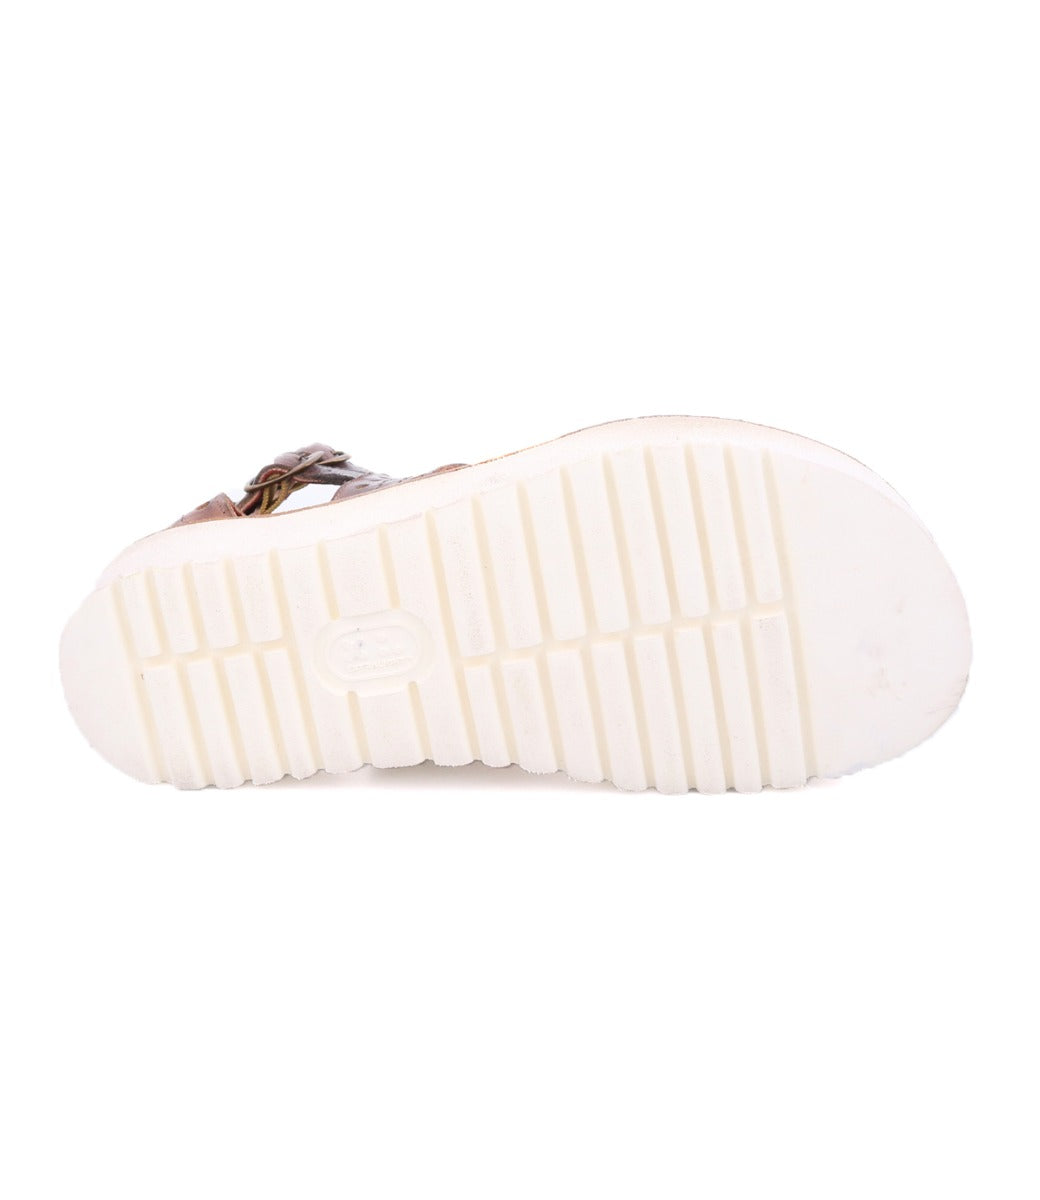 A pair of Bed Stu Camden women's sandals with white soles on a white background.